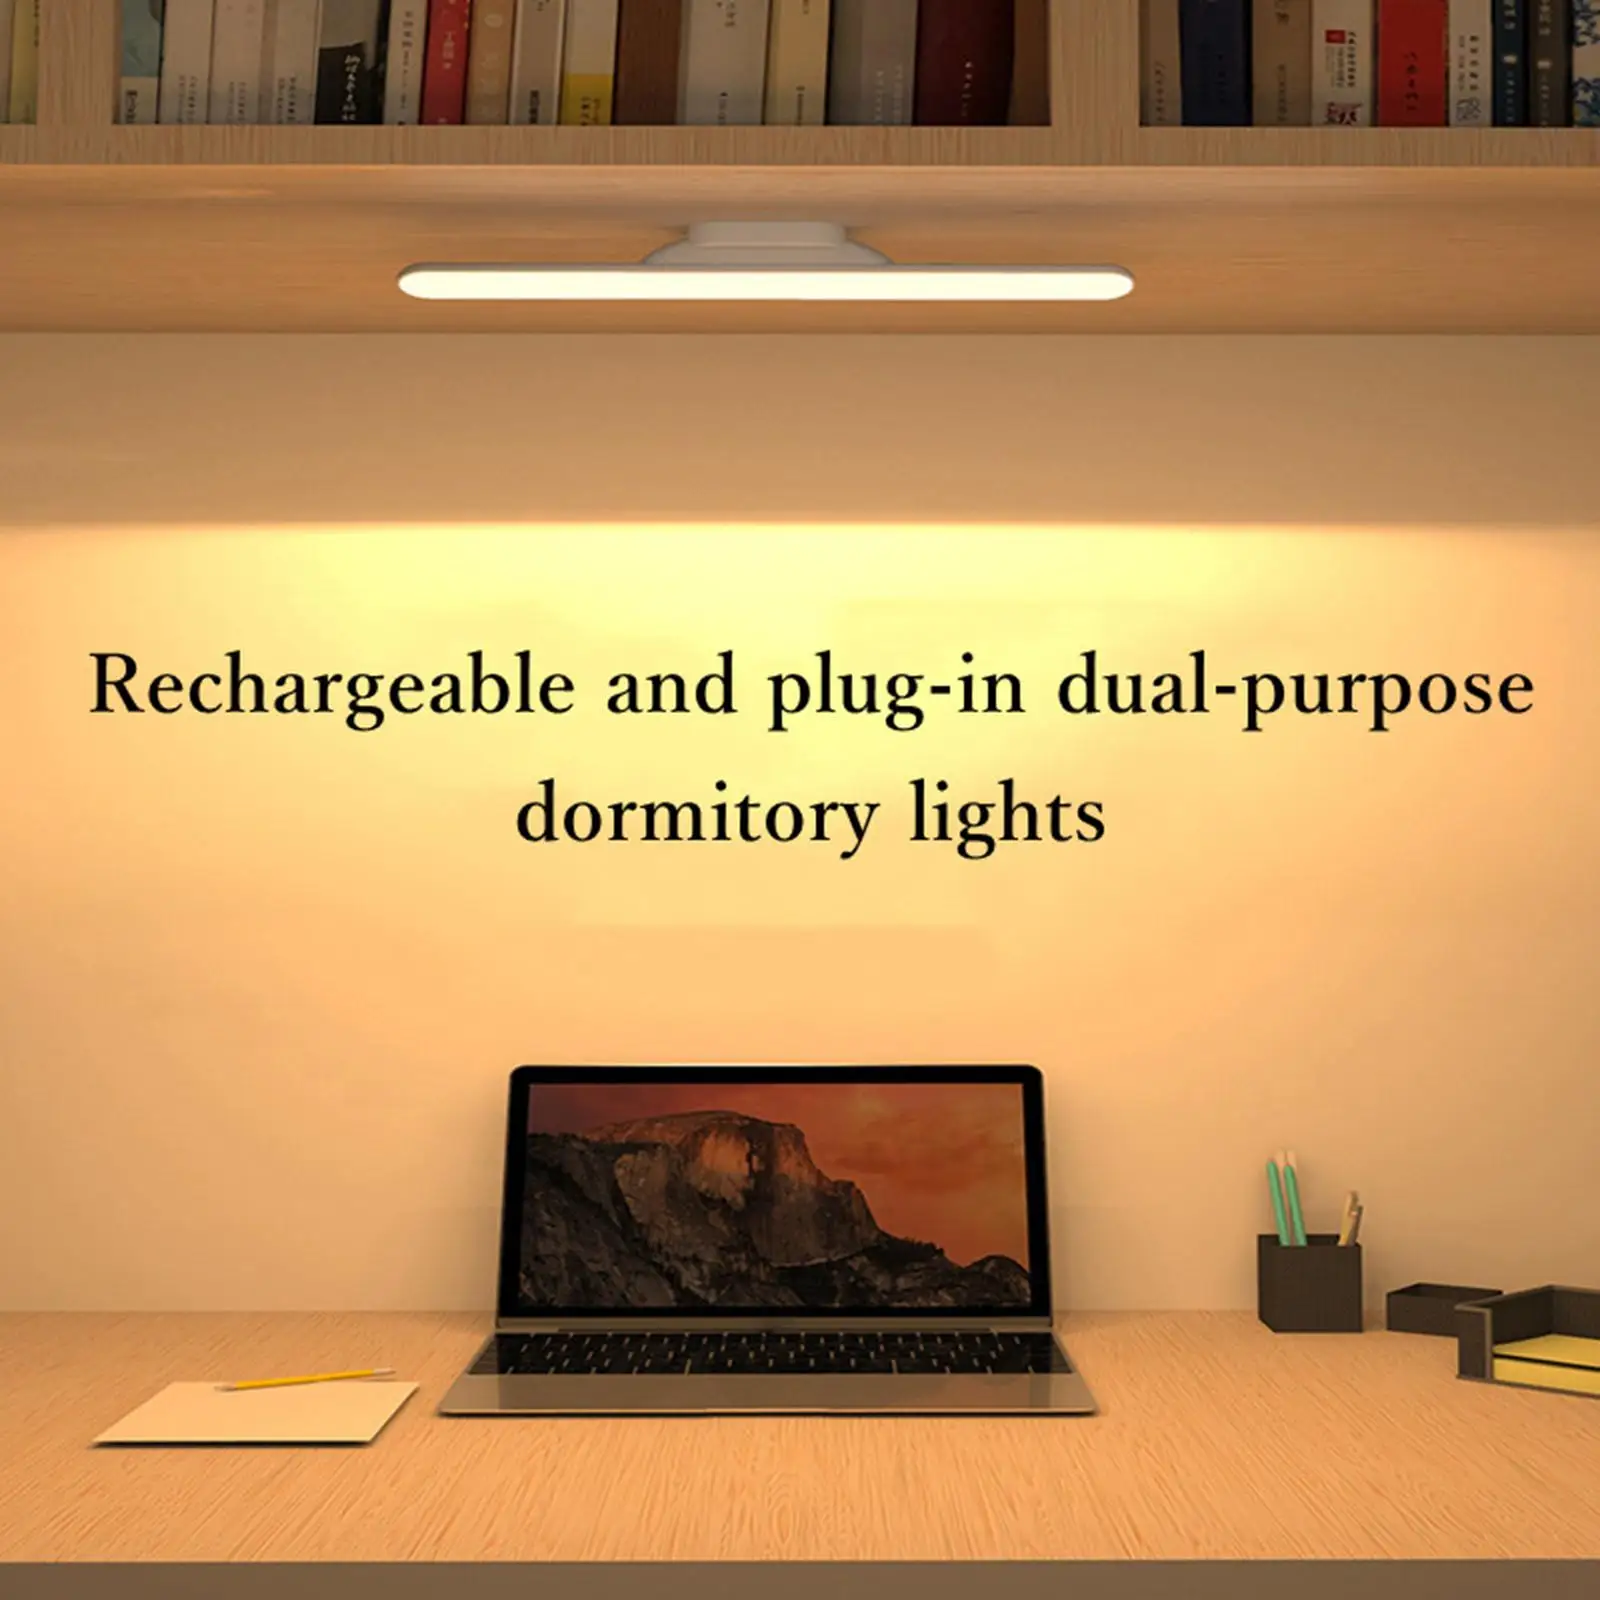 Wall Reading Light Stick Lamp Mount Dimmable Bar for Study Room Bedside Makeup Mirror Closet Dorm